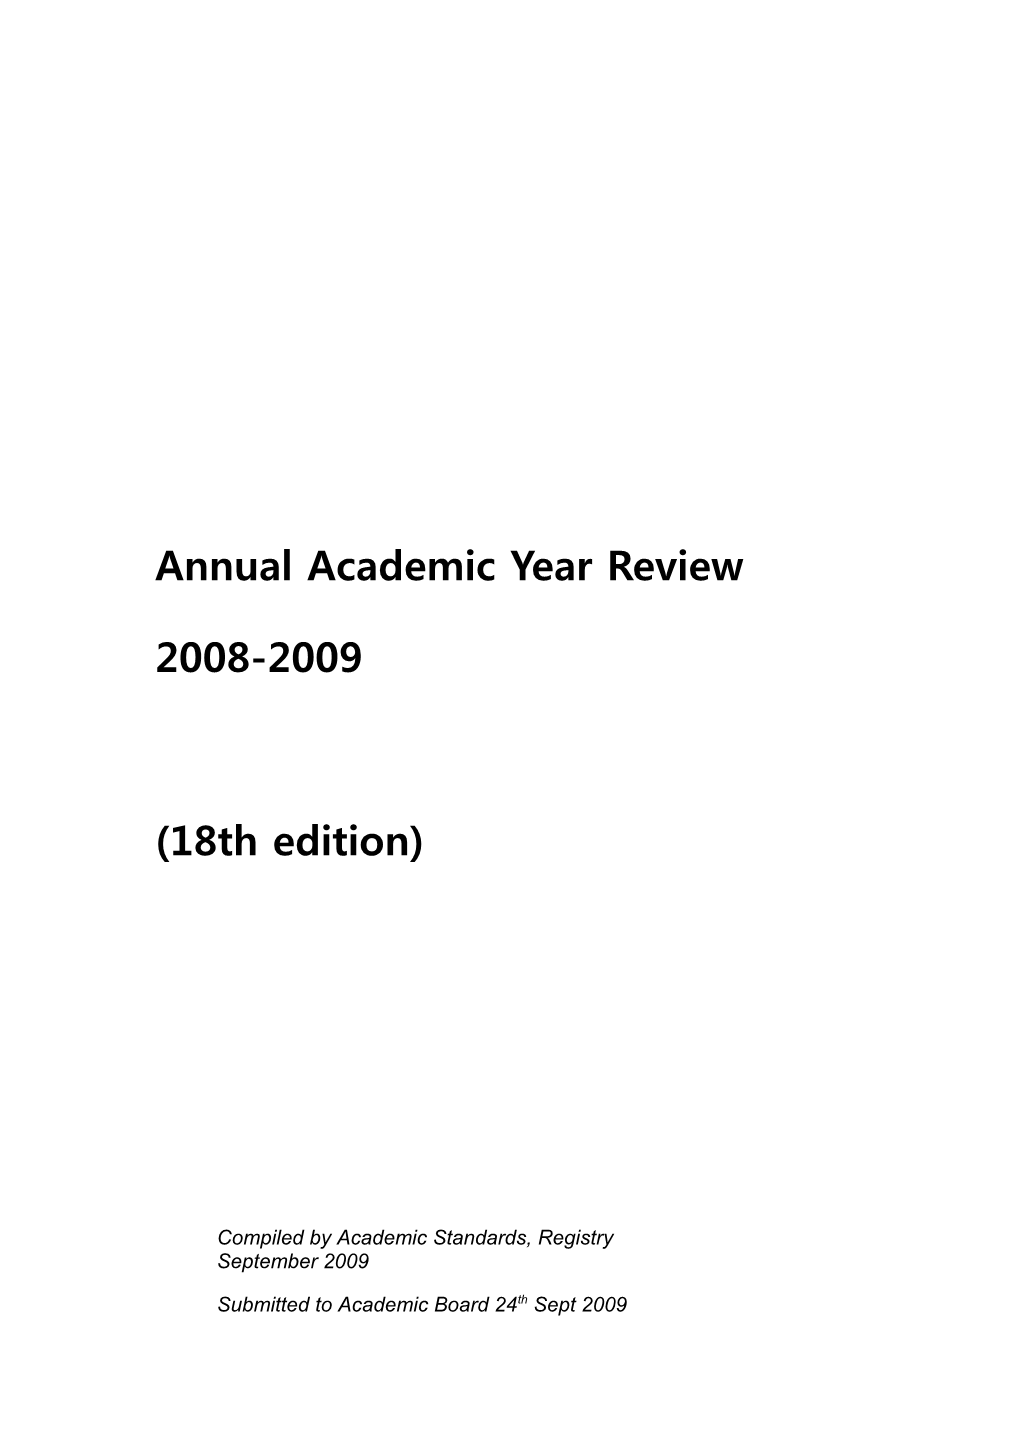 Annual Academic Year Review 2008-09